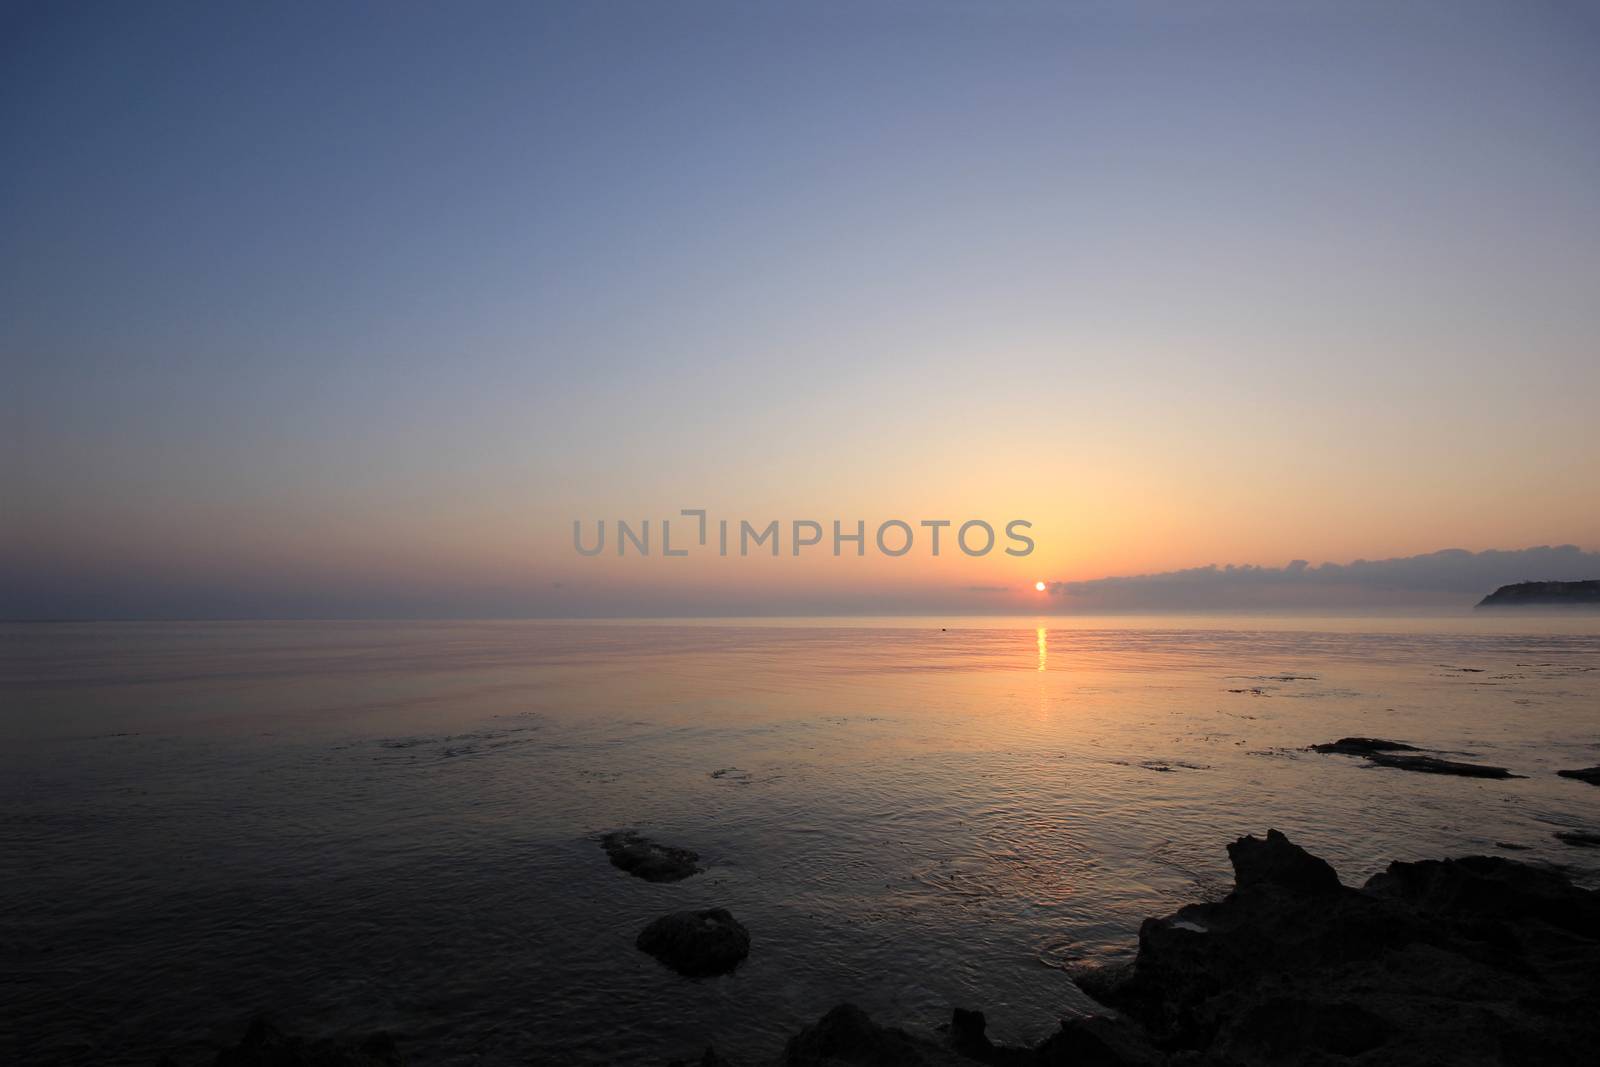 Sunrise over the Ionian sea by Netfalls